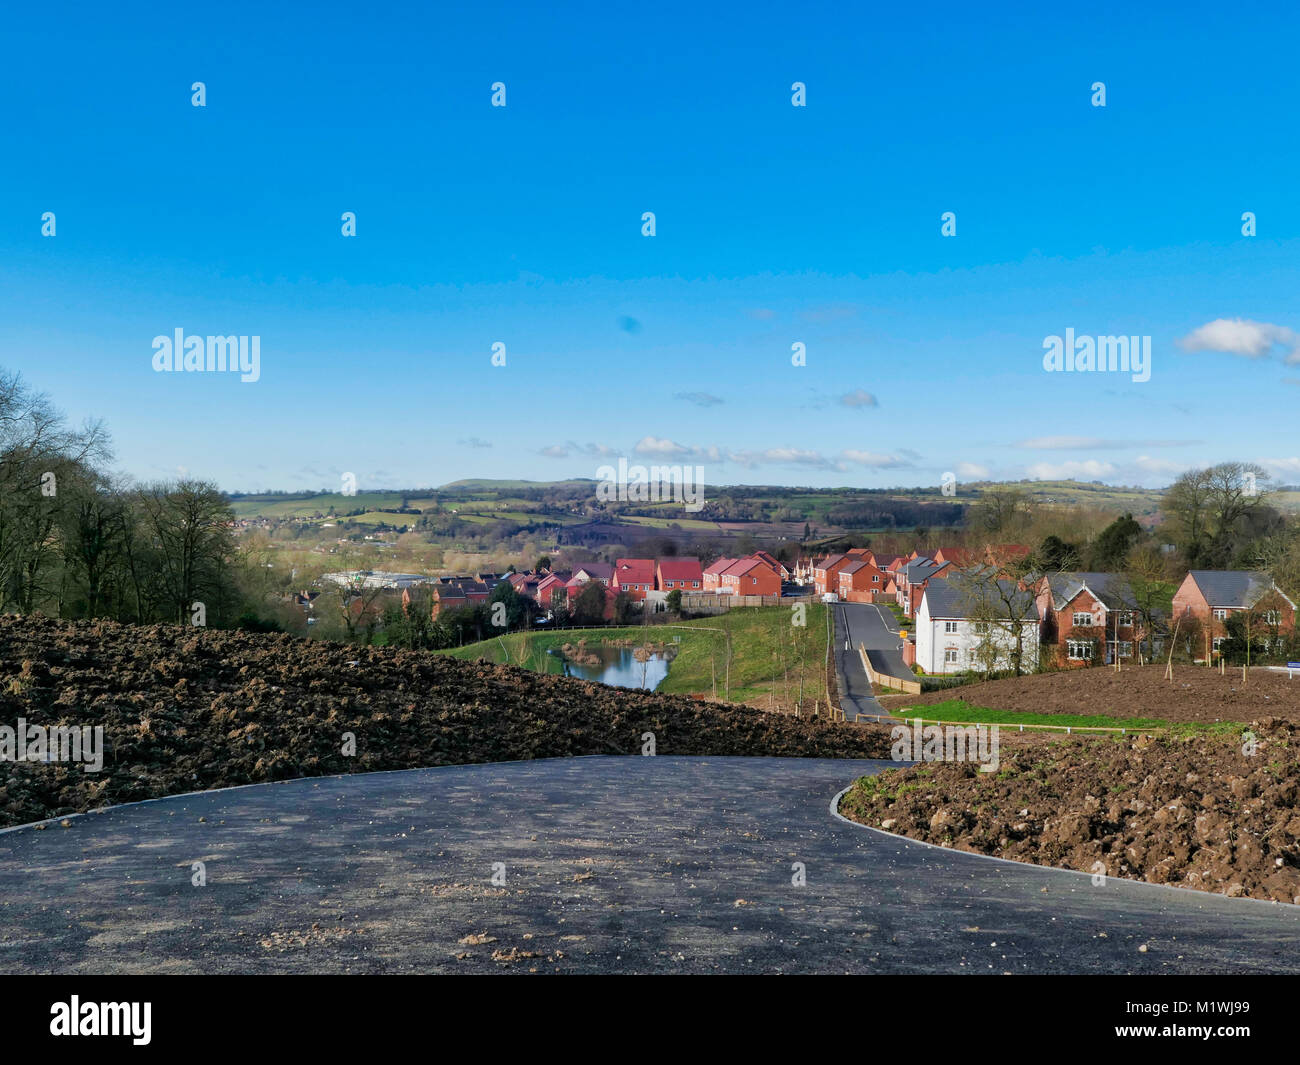 Ashbourne, Derbyshire. 2nd Feb, 2018. UK Weather: unusually warm & sunny Febrary day on a new housing development in Ashbourne Derbyshire the gateway for the Peak District National Park ahead of the Ashbourne shrovetide football match 2018 Credit: Doug Blane/Alamy Live News Stock Photo